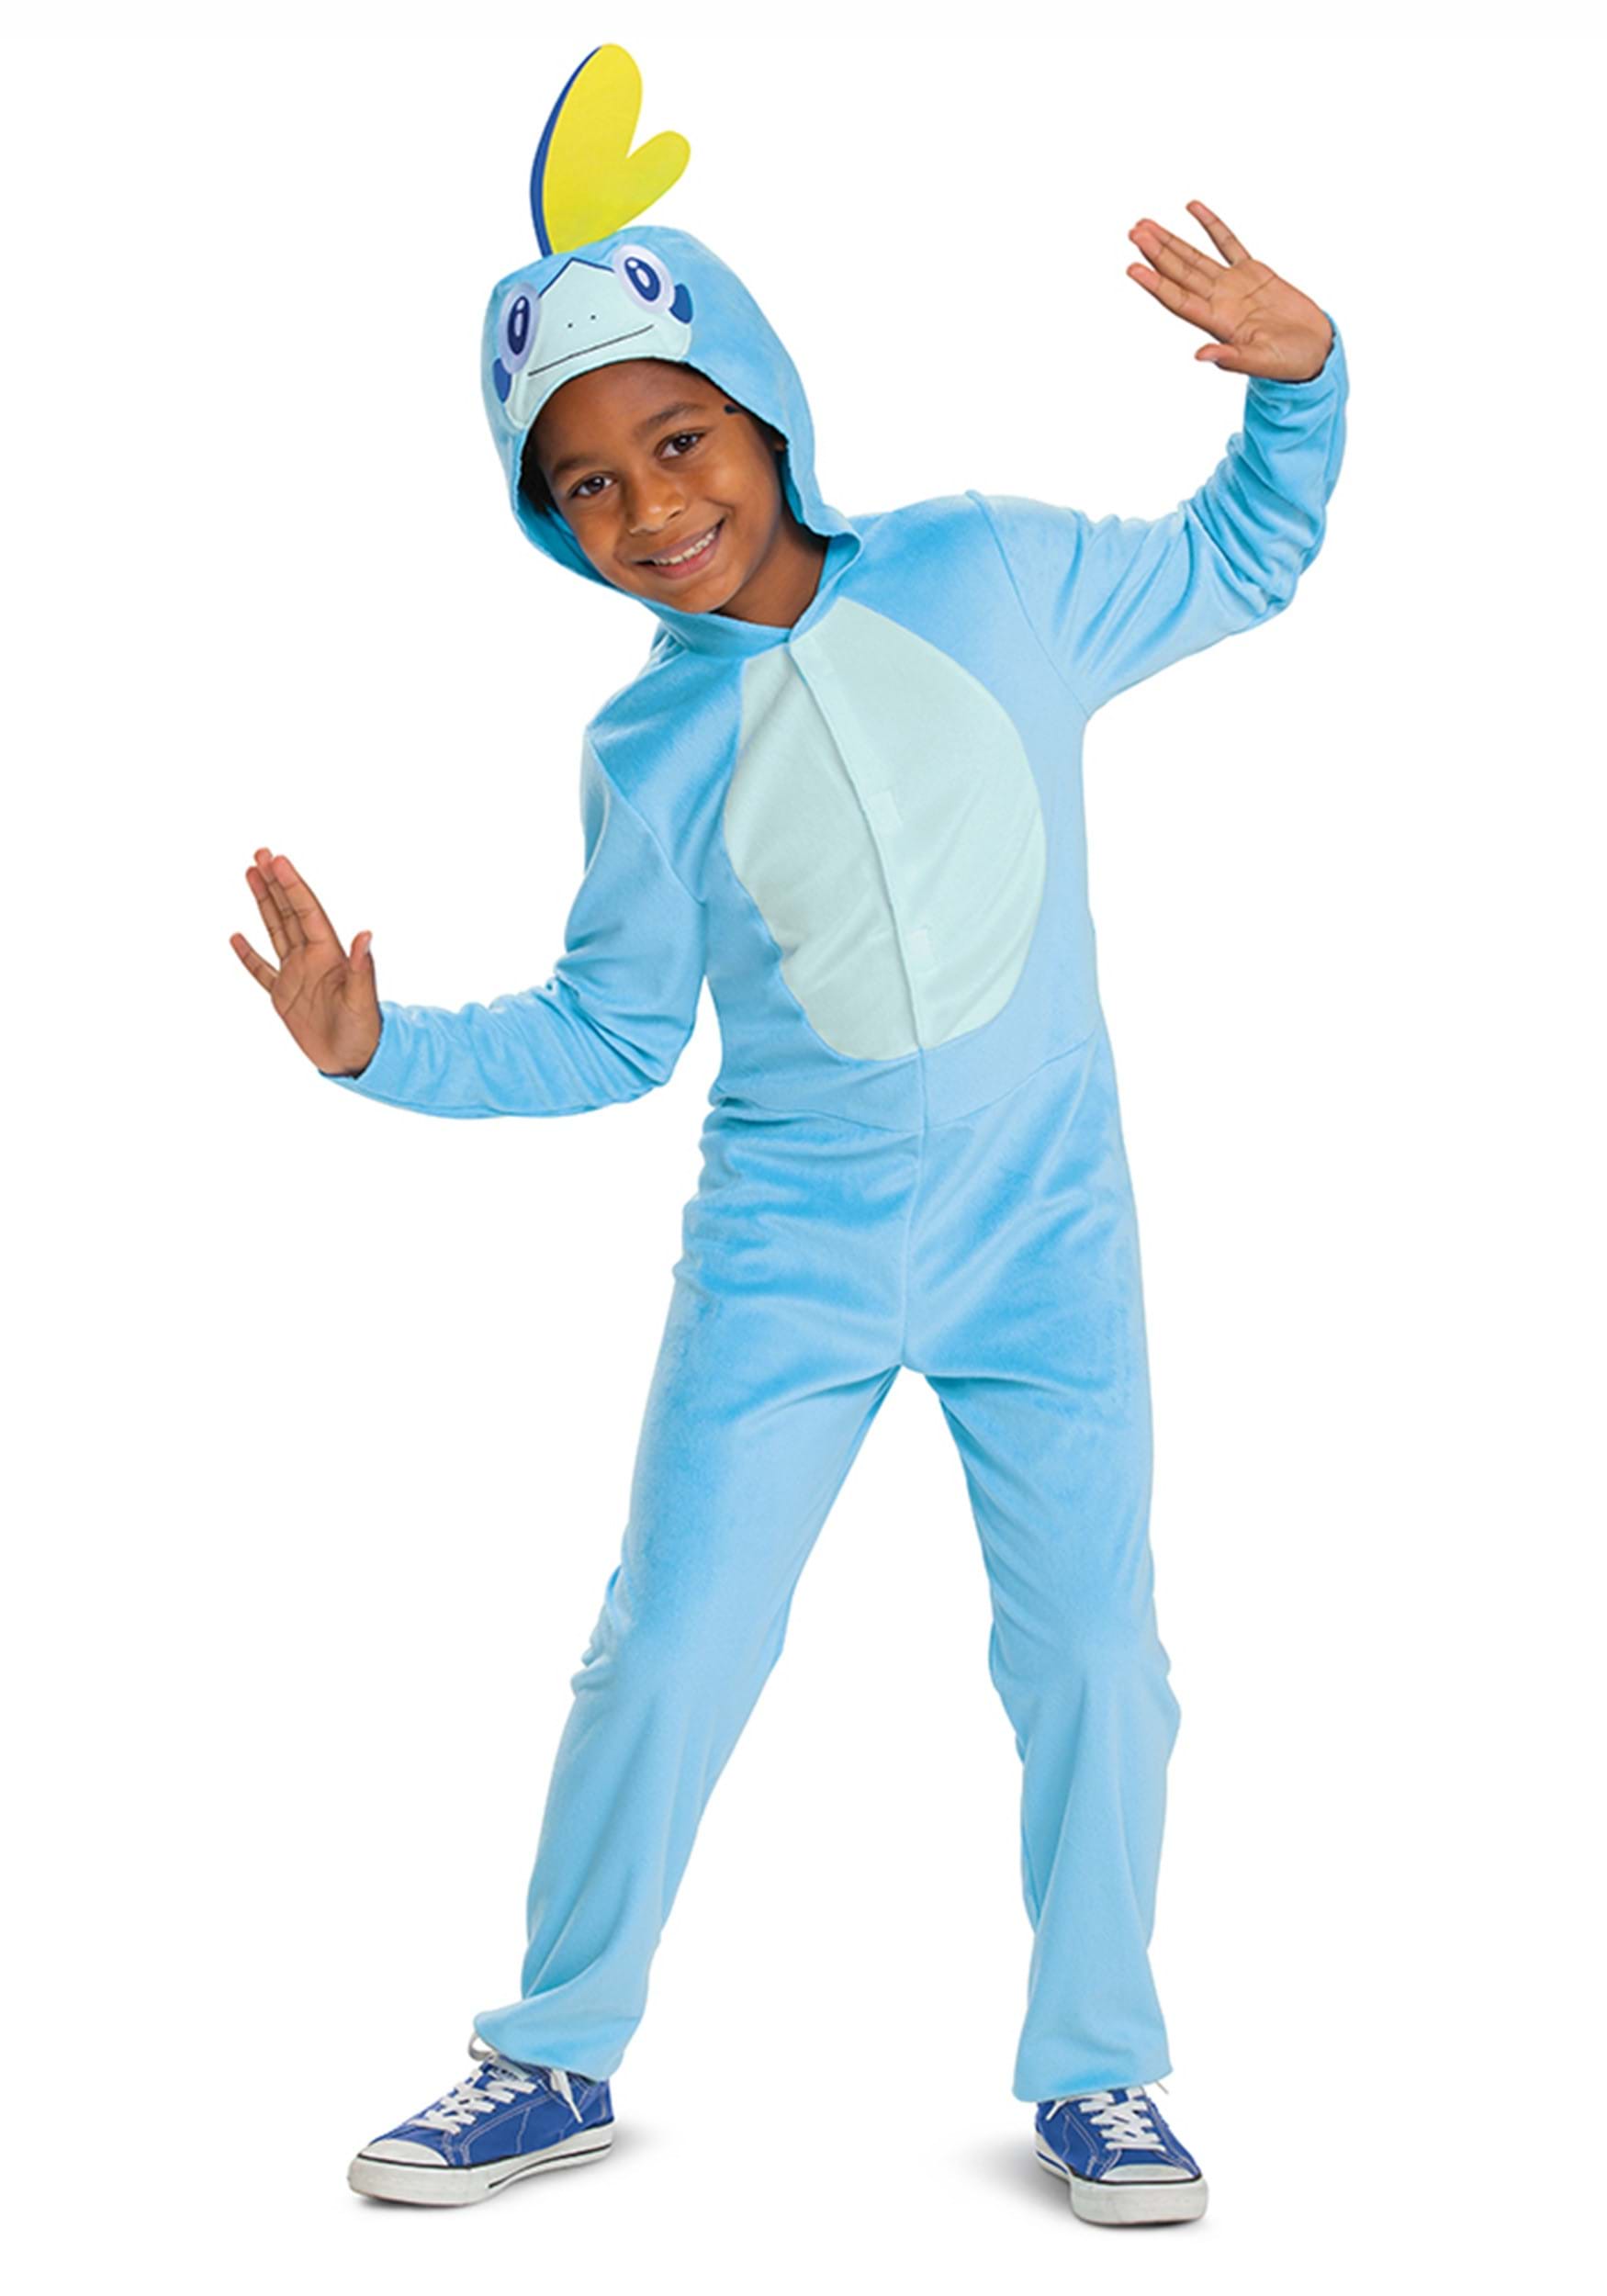 https://images.halloweencostumes.ca/products/73389/1-1/pokemon-sobble-hooded-jumpsuit-classic-costume.jpg